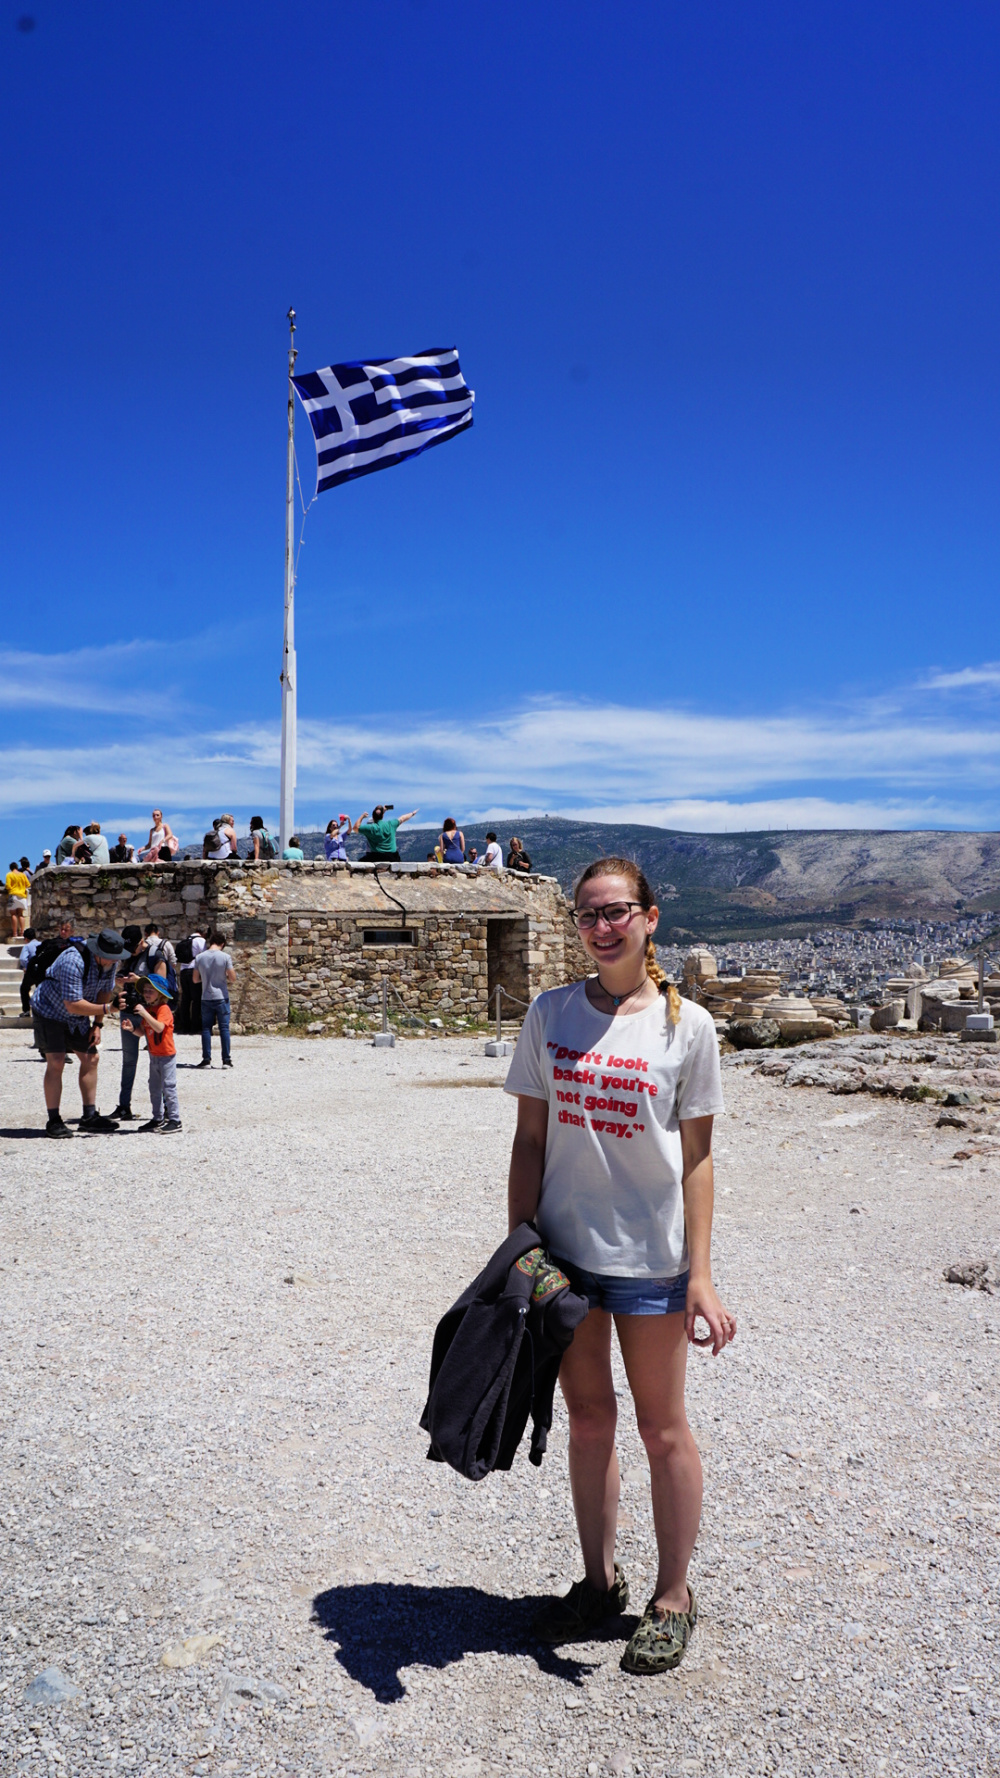 Angeline Pridemore standing in front of the Greek flag at the Acropolis in Athens Greece